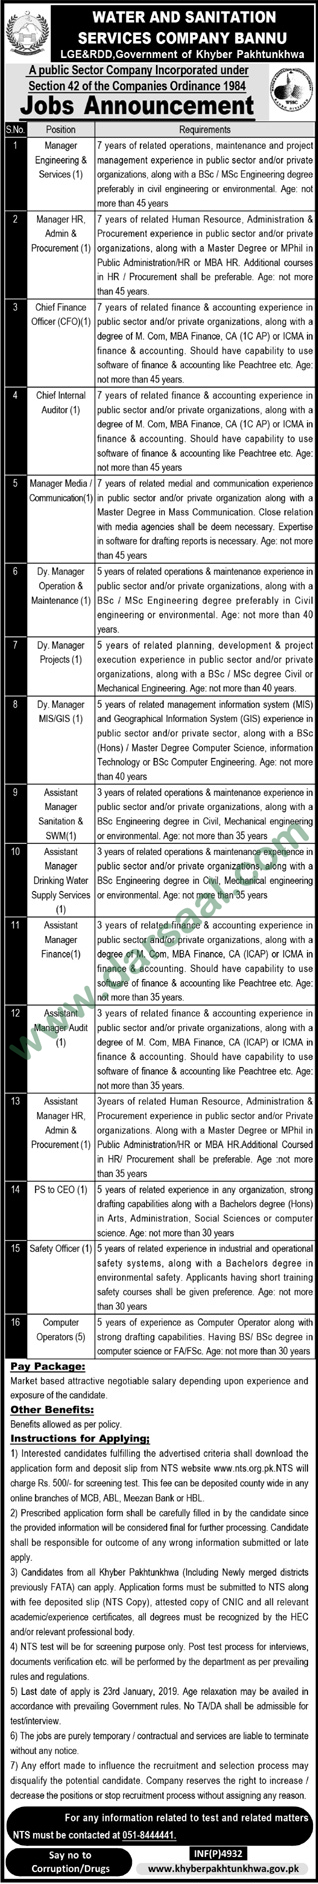 Manager Jobs in Water & Sanitation Services Company Bannu in Bannu - Dec 27, 2018